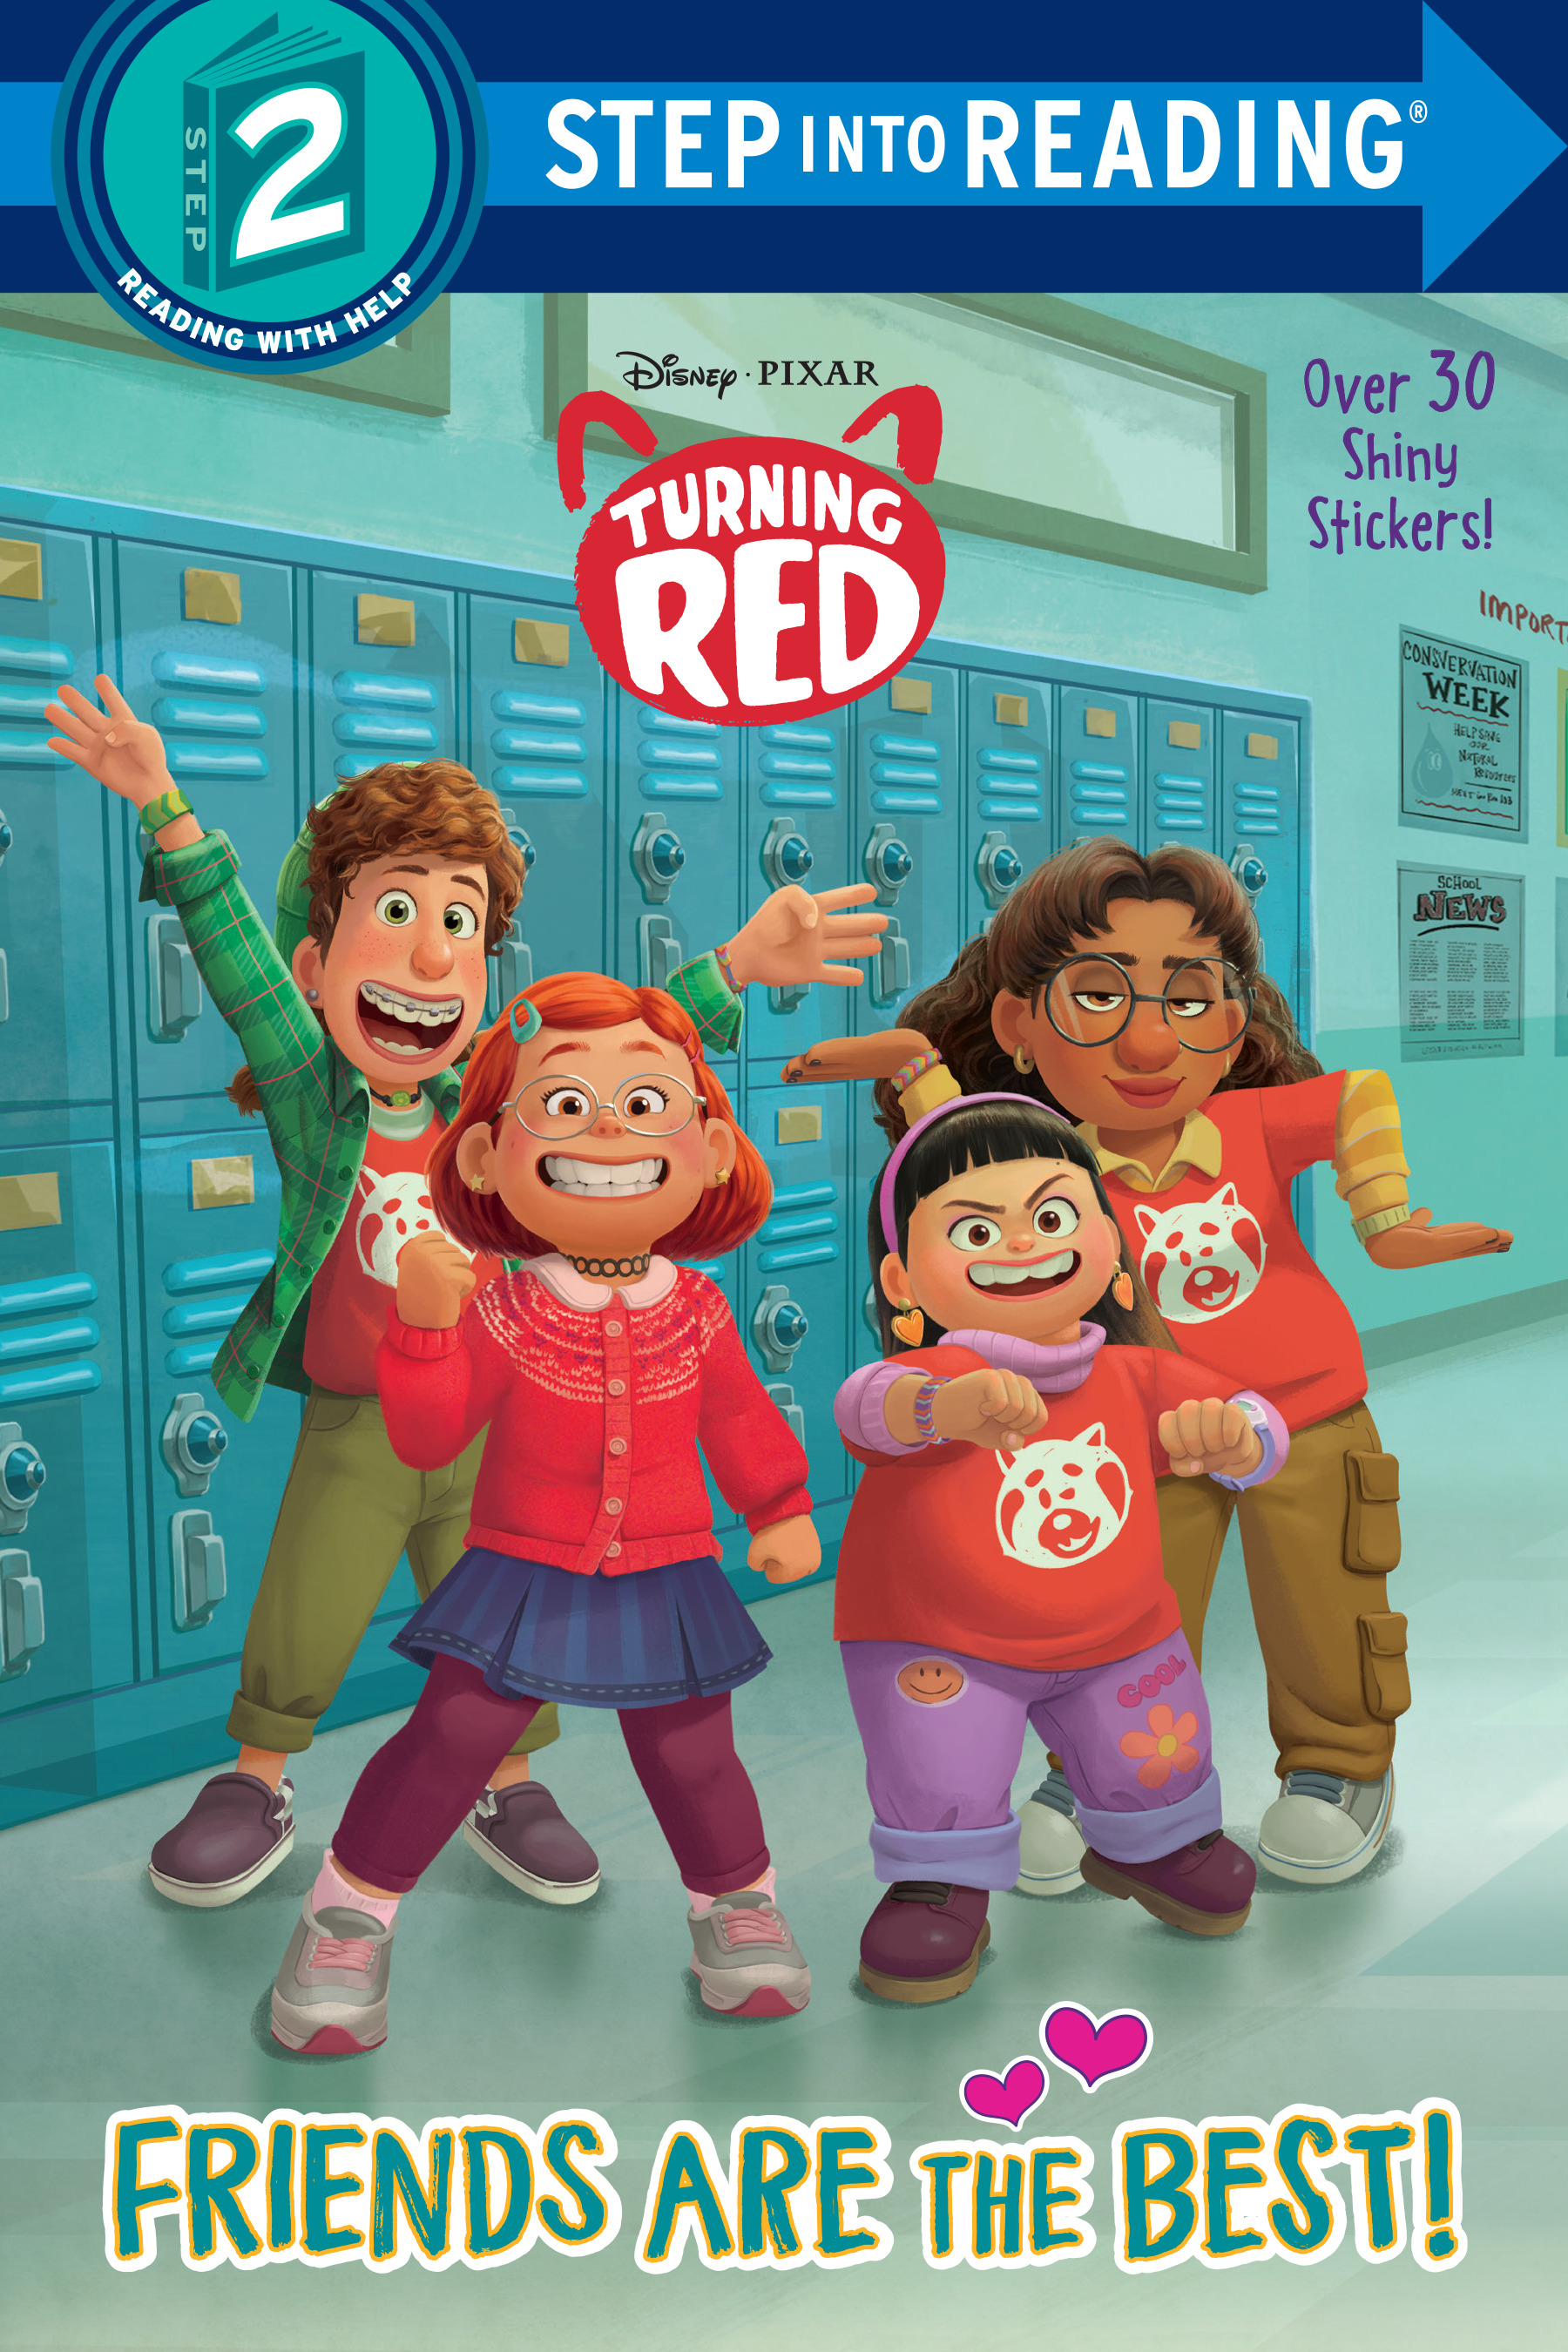 Step Into Reading - Friends Are the Best! (Disney/Pixar Turning Red) | First reader